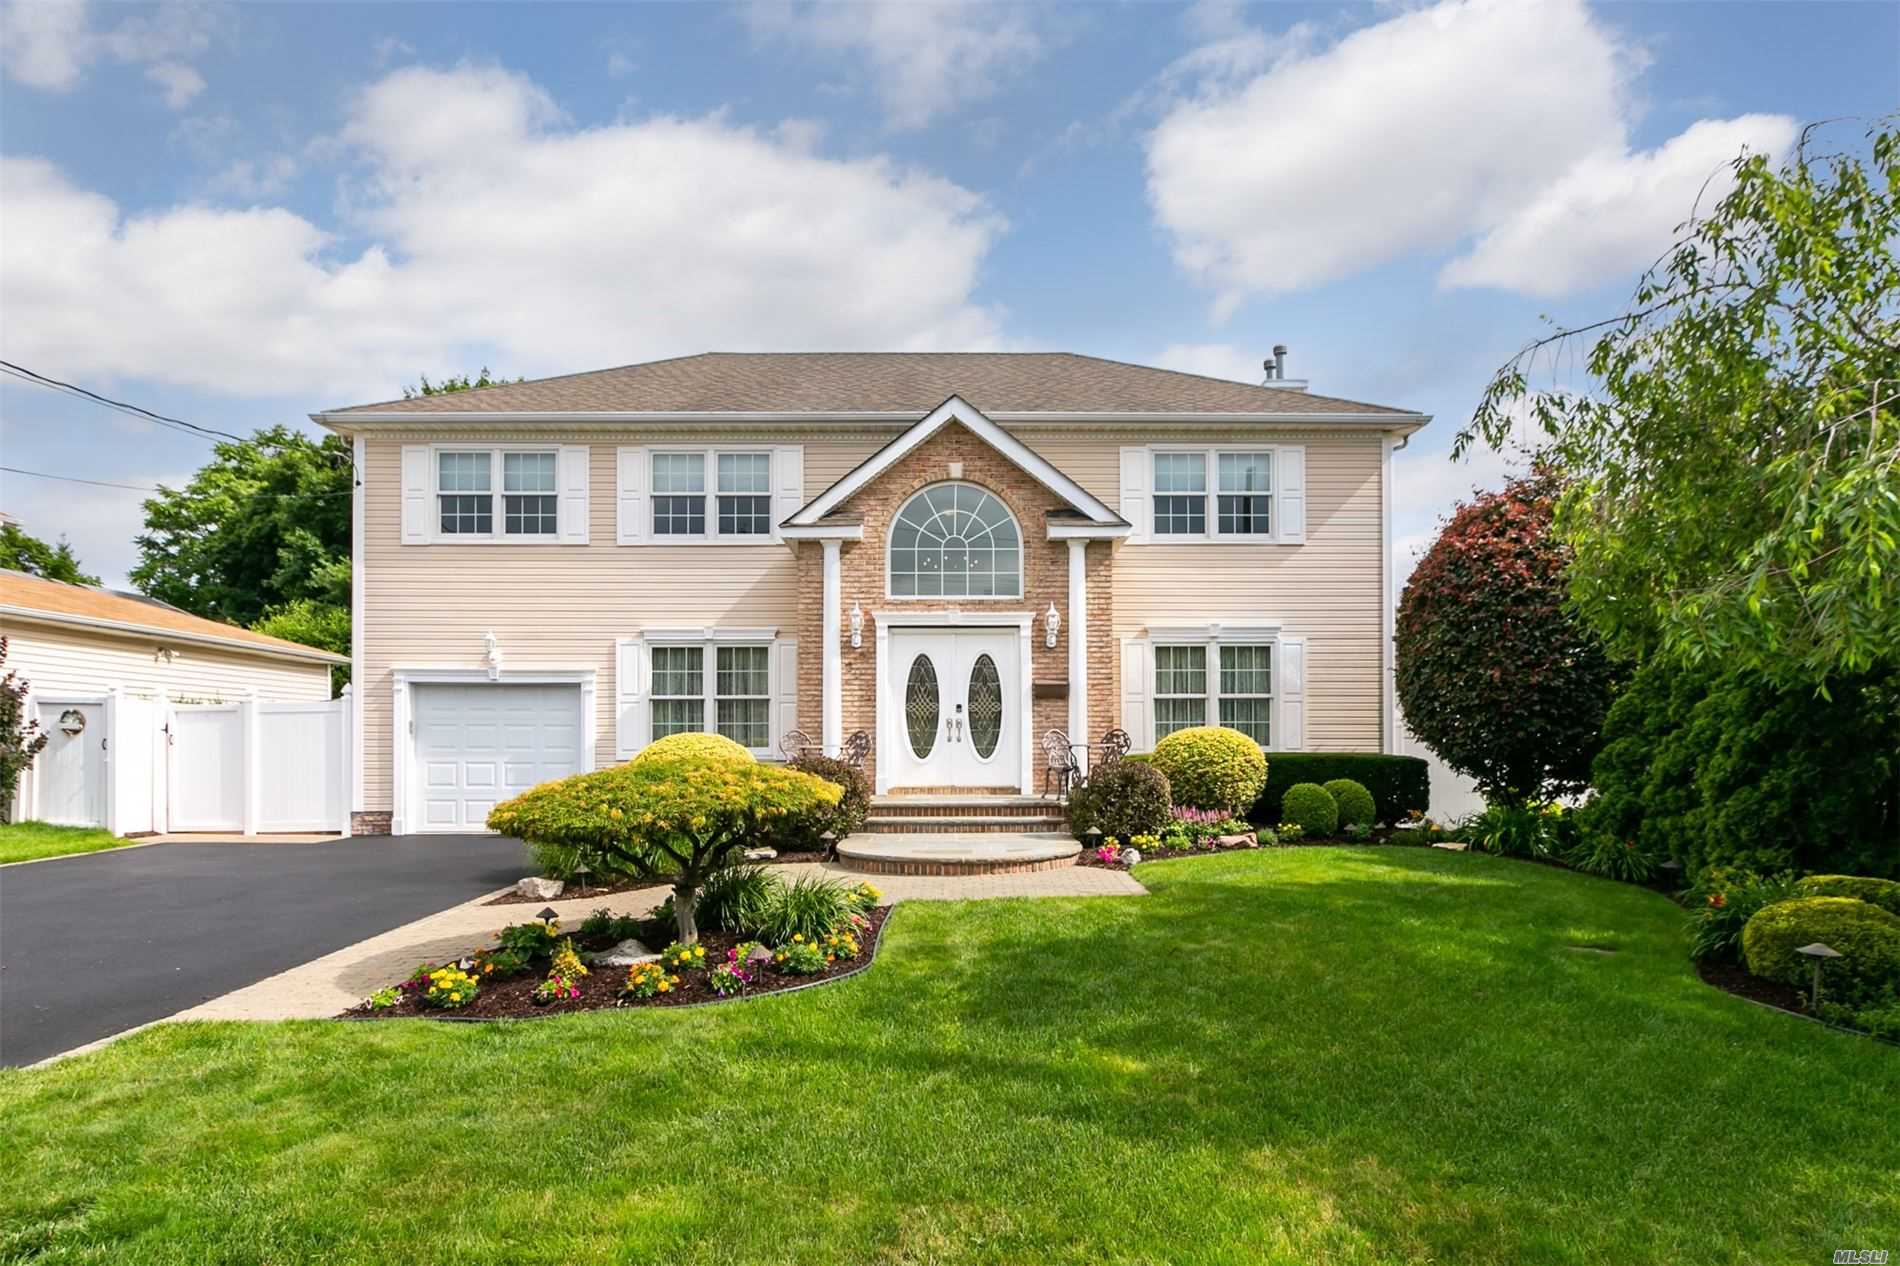 This Stunning, Turn Key Centerhall Colonial Checks Every Box for Move in Ready Buyers! Charm & Elegance Abound From First Steps Into 2 Story Grand Entry! Gleaming Hardwd Flrs! FDR, LR, Den w/Gas Fplce, EIK w/Cherry Cabinets, Granite Counters, Upstairs Expansive Master Suite w/WIC & MBath, 3 Large BRs, Full Bath. Backyard is an Entertainers Dream w/IG Kidney Shape Pool w/Waterfall! Mature Plantings for Privacy and Large Paver Patio! Updated Anderson Windows, IGS, Gas Heating, CAC, Low Taxes!